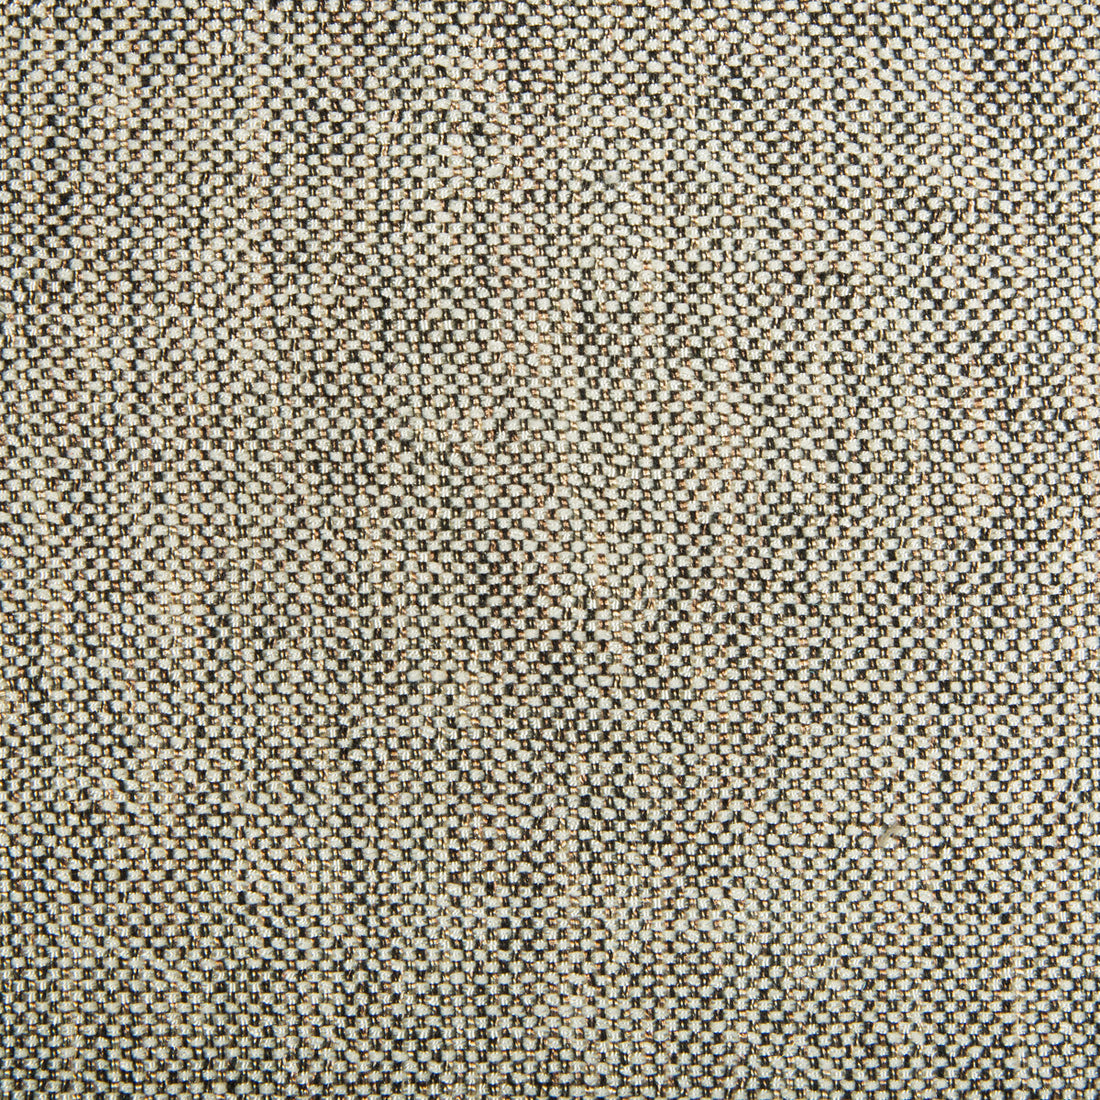 Kravet Contract fabric in 34926-816 color - pattern 34926.816.0 - by Kravet Contract